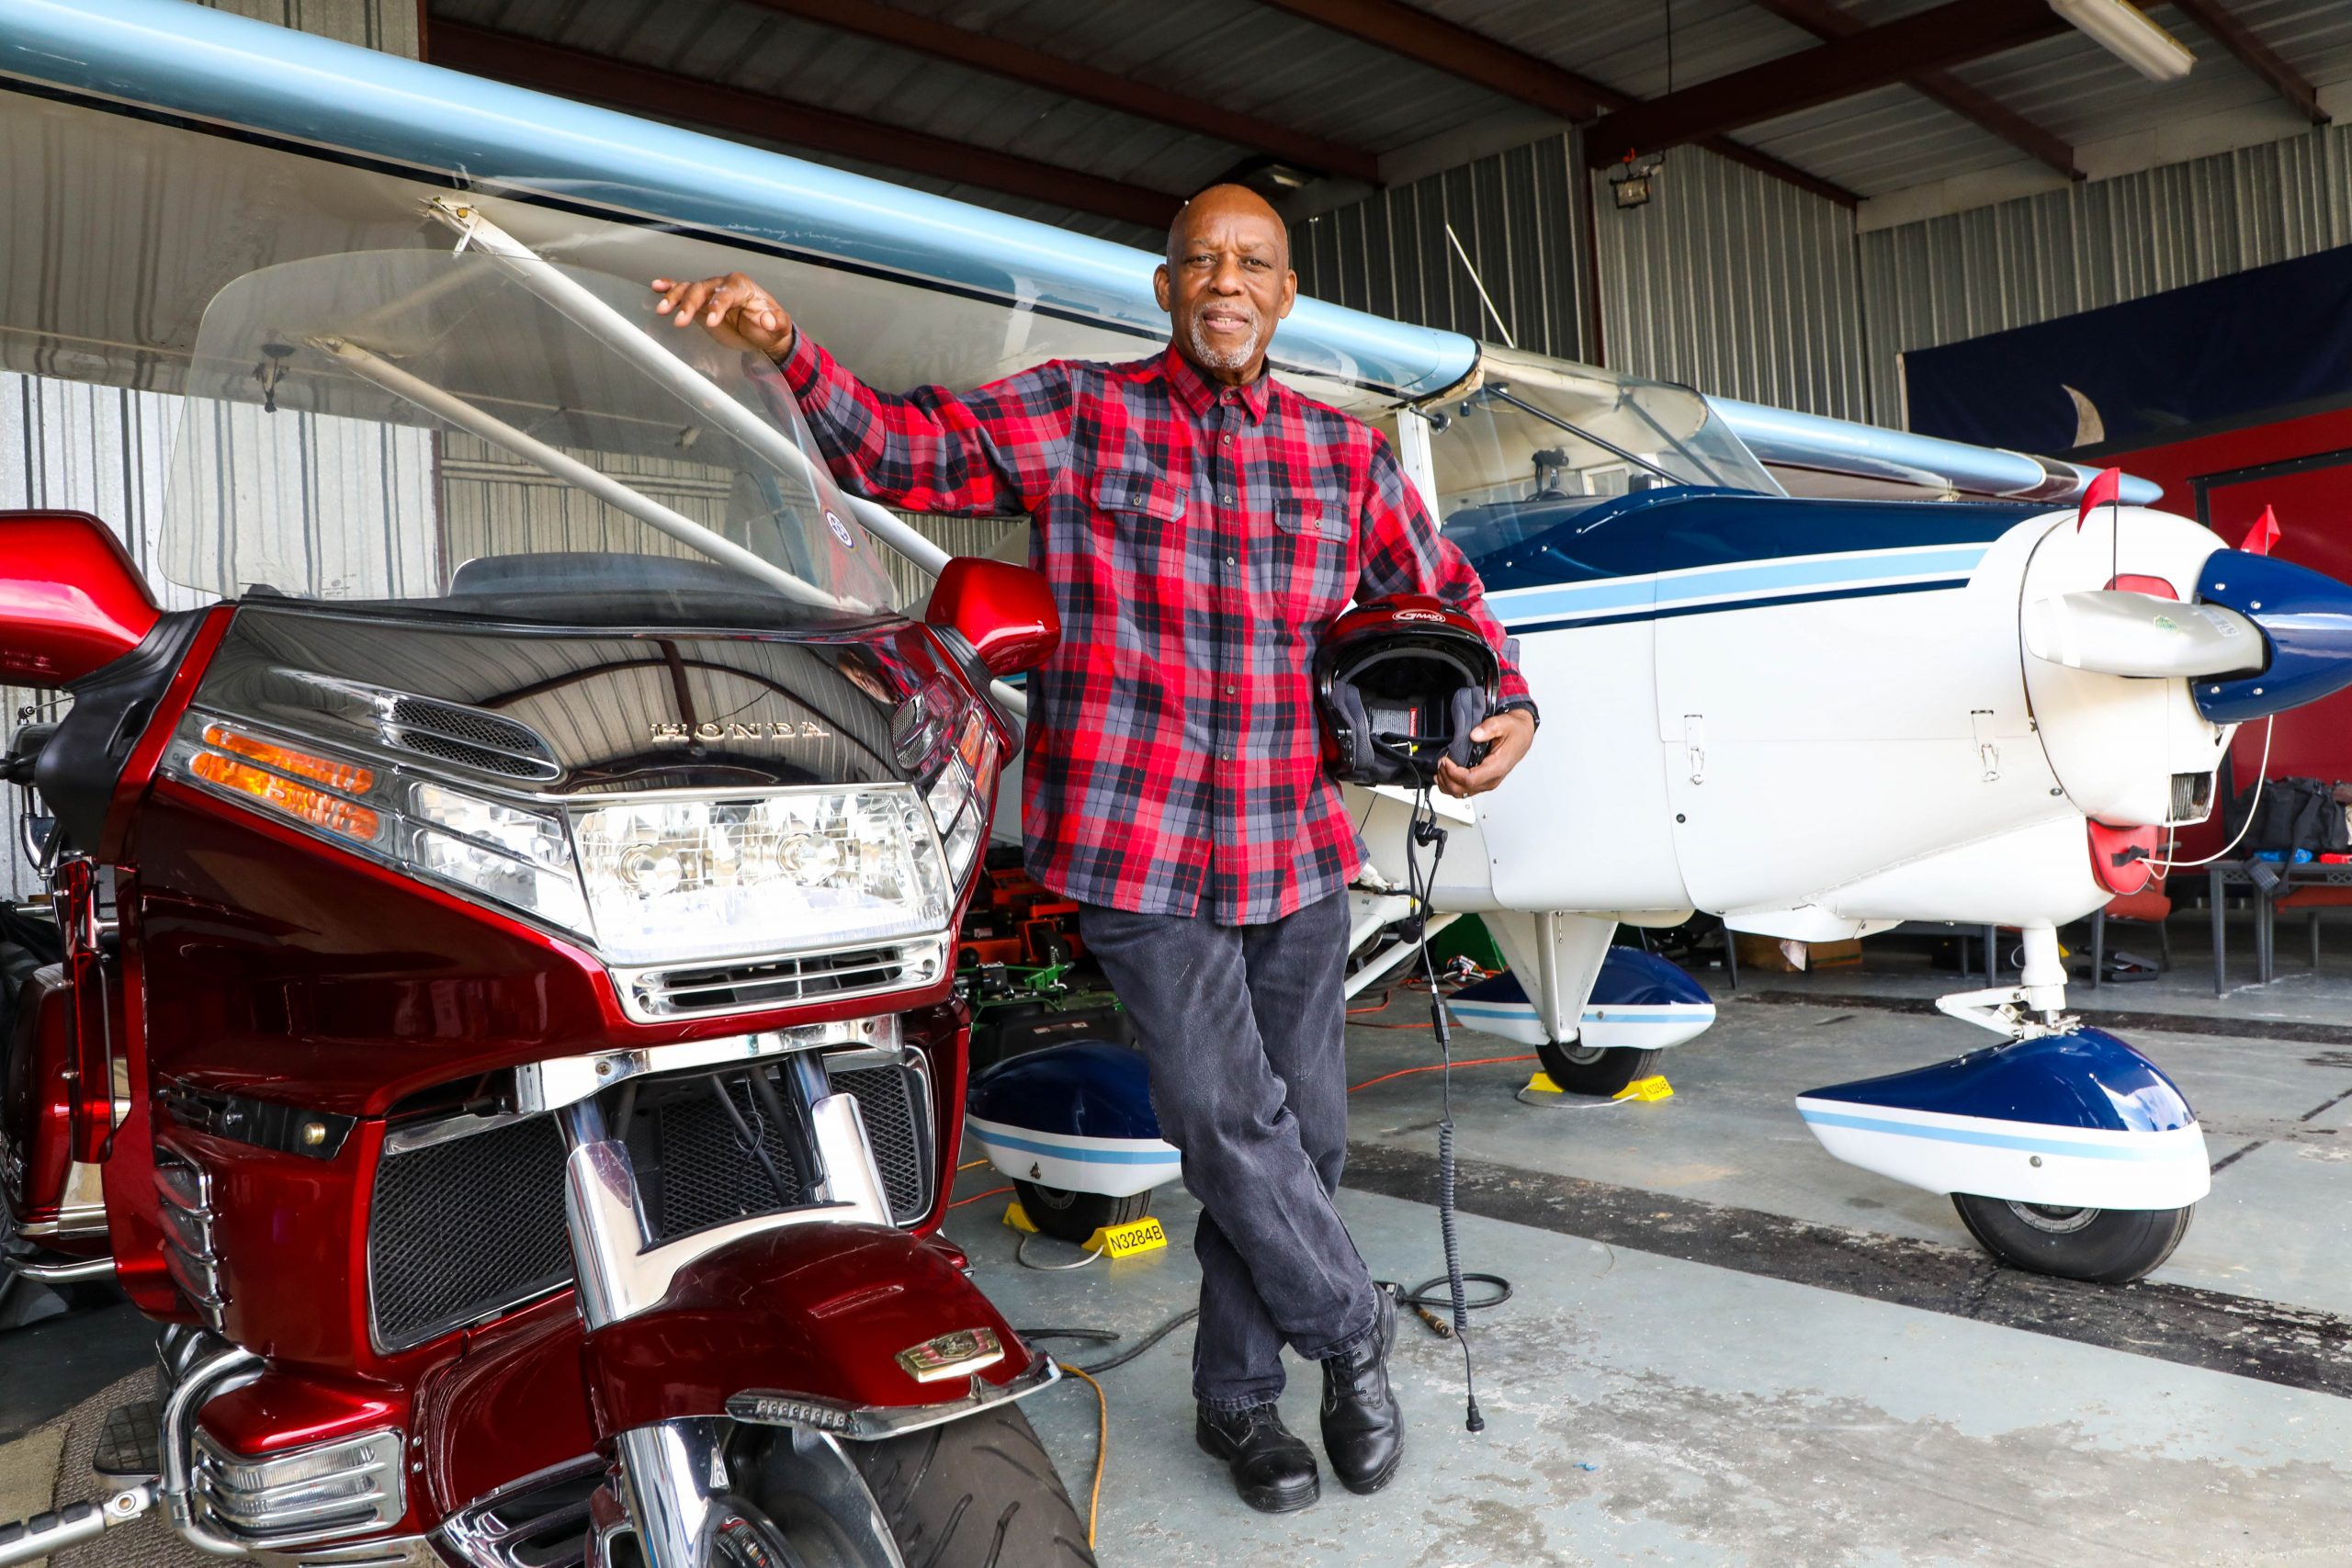 Opposite: Retired policeman Gary Glover of Blythewood has ridden motorcycles for more than 40 years. In addition to his Piper Tri-Pacer airplane, Gary also keeps his Honda Gold Wing in his hangar. 
